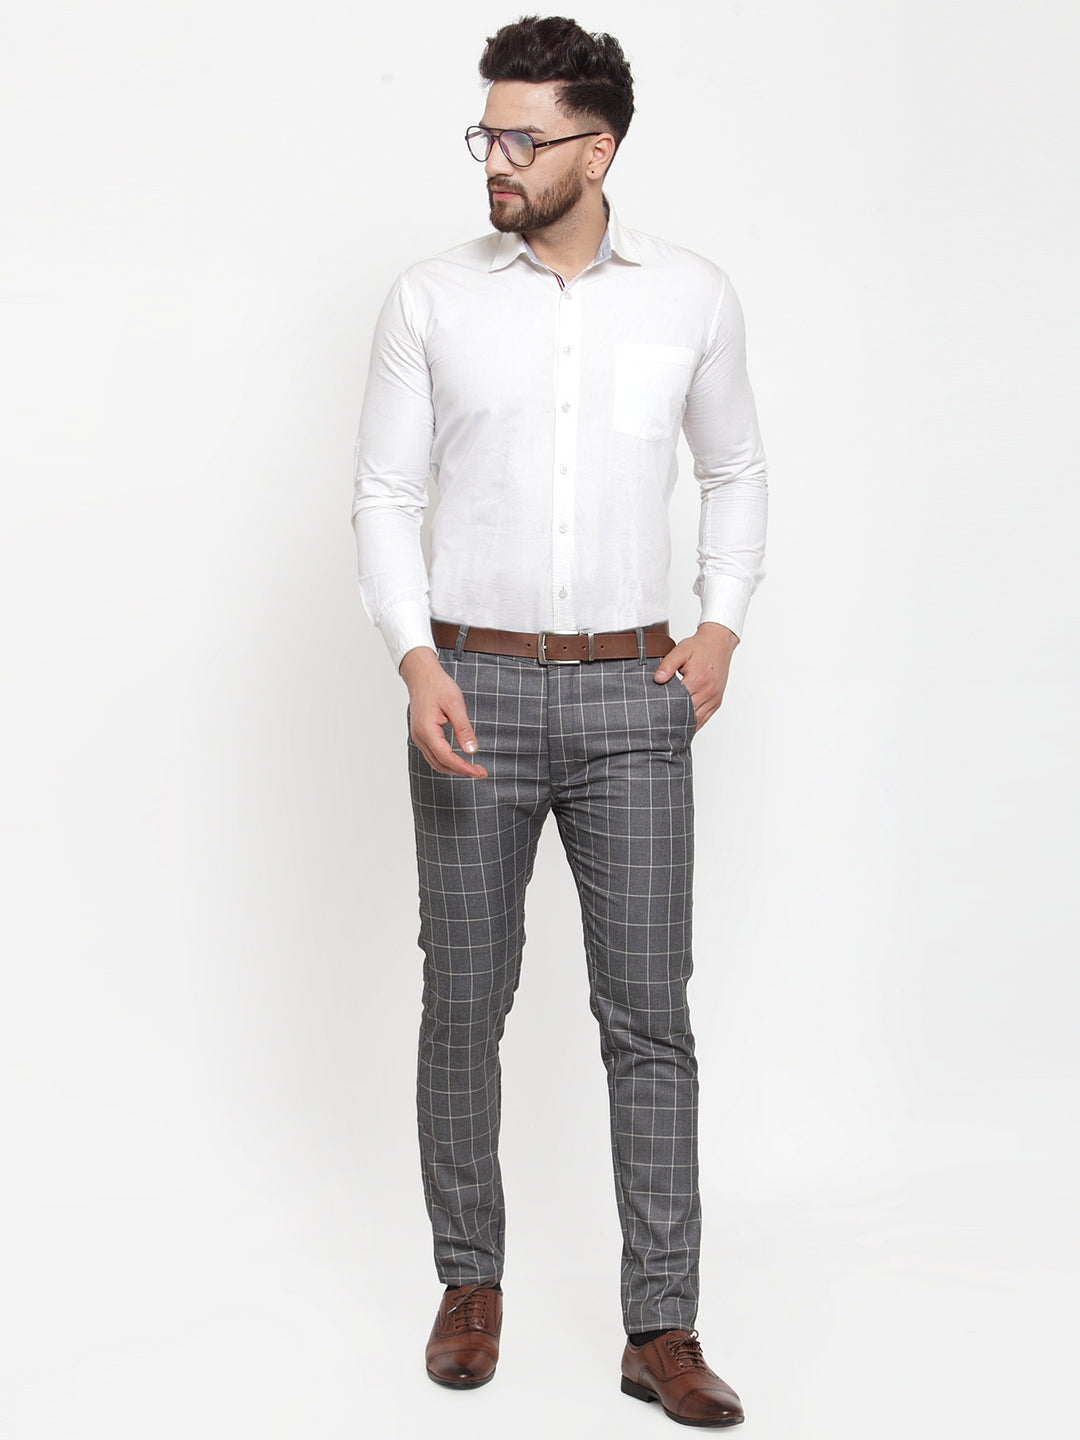 Light Grey Check Skinny Trousers  New Look